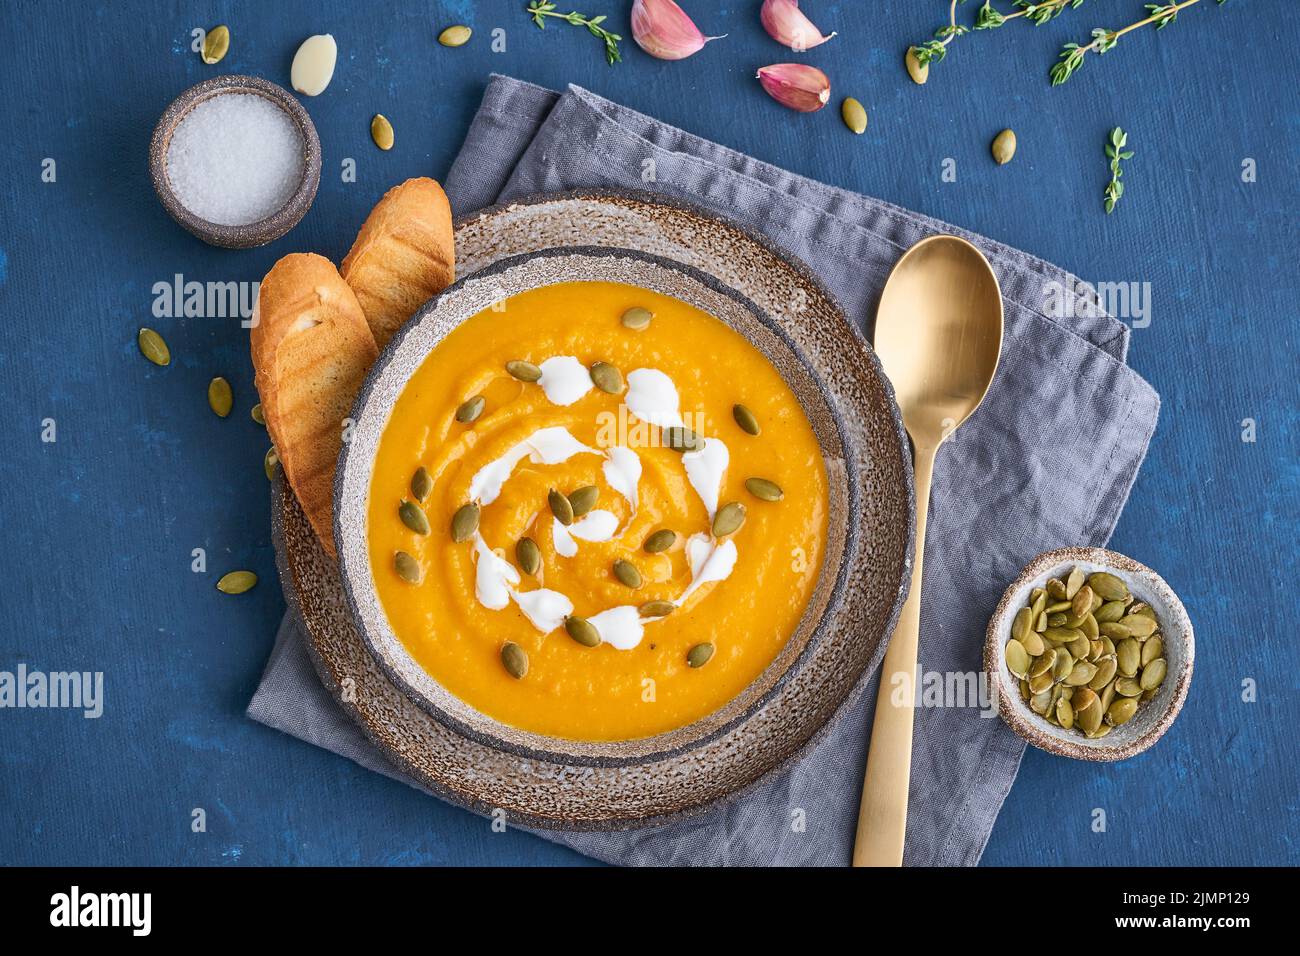 Pupmkin cream soup puree on dark blue wooden table, dietary vegetarian lunch, top view. Stock Photo